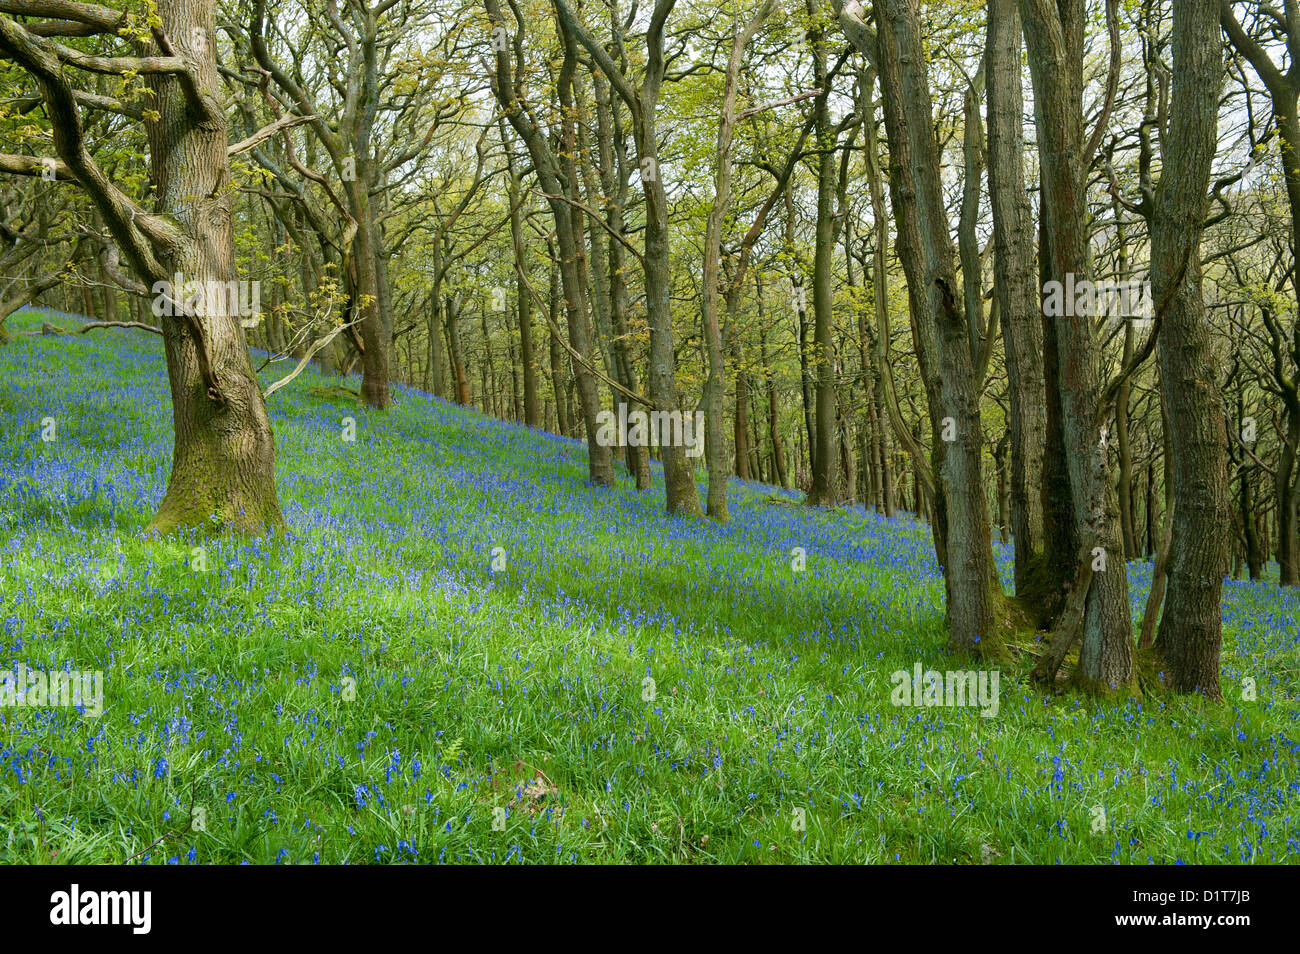 Carpet of Bluebells in ancient woodland, late spring. Hyacinthoides non-scripta Stock Photo